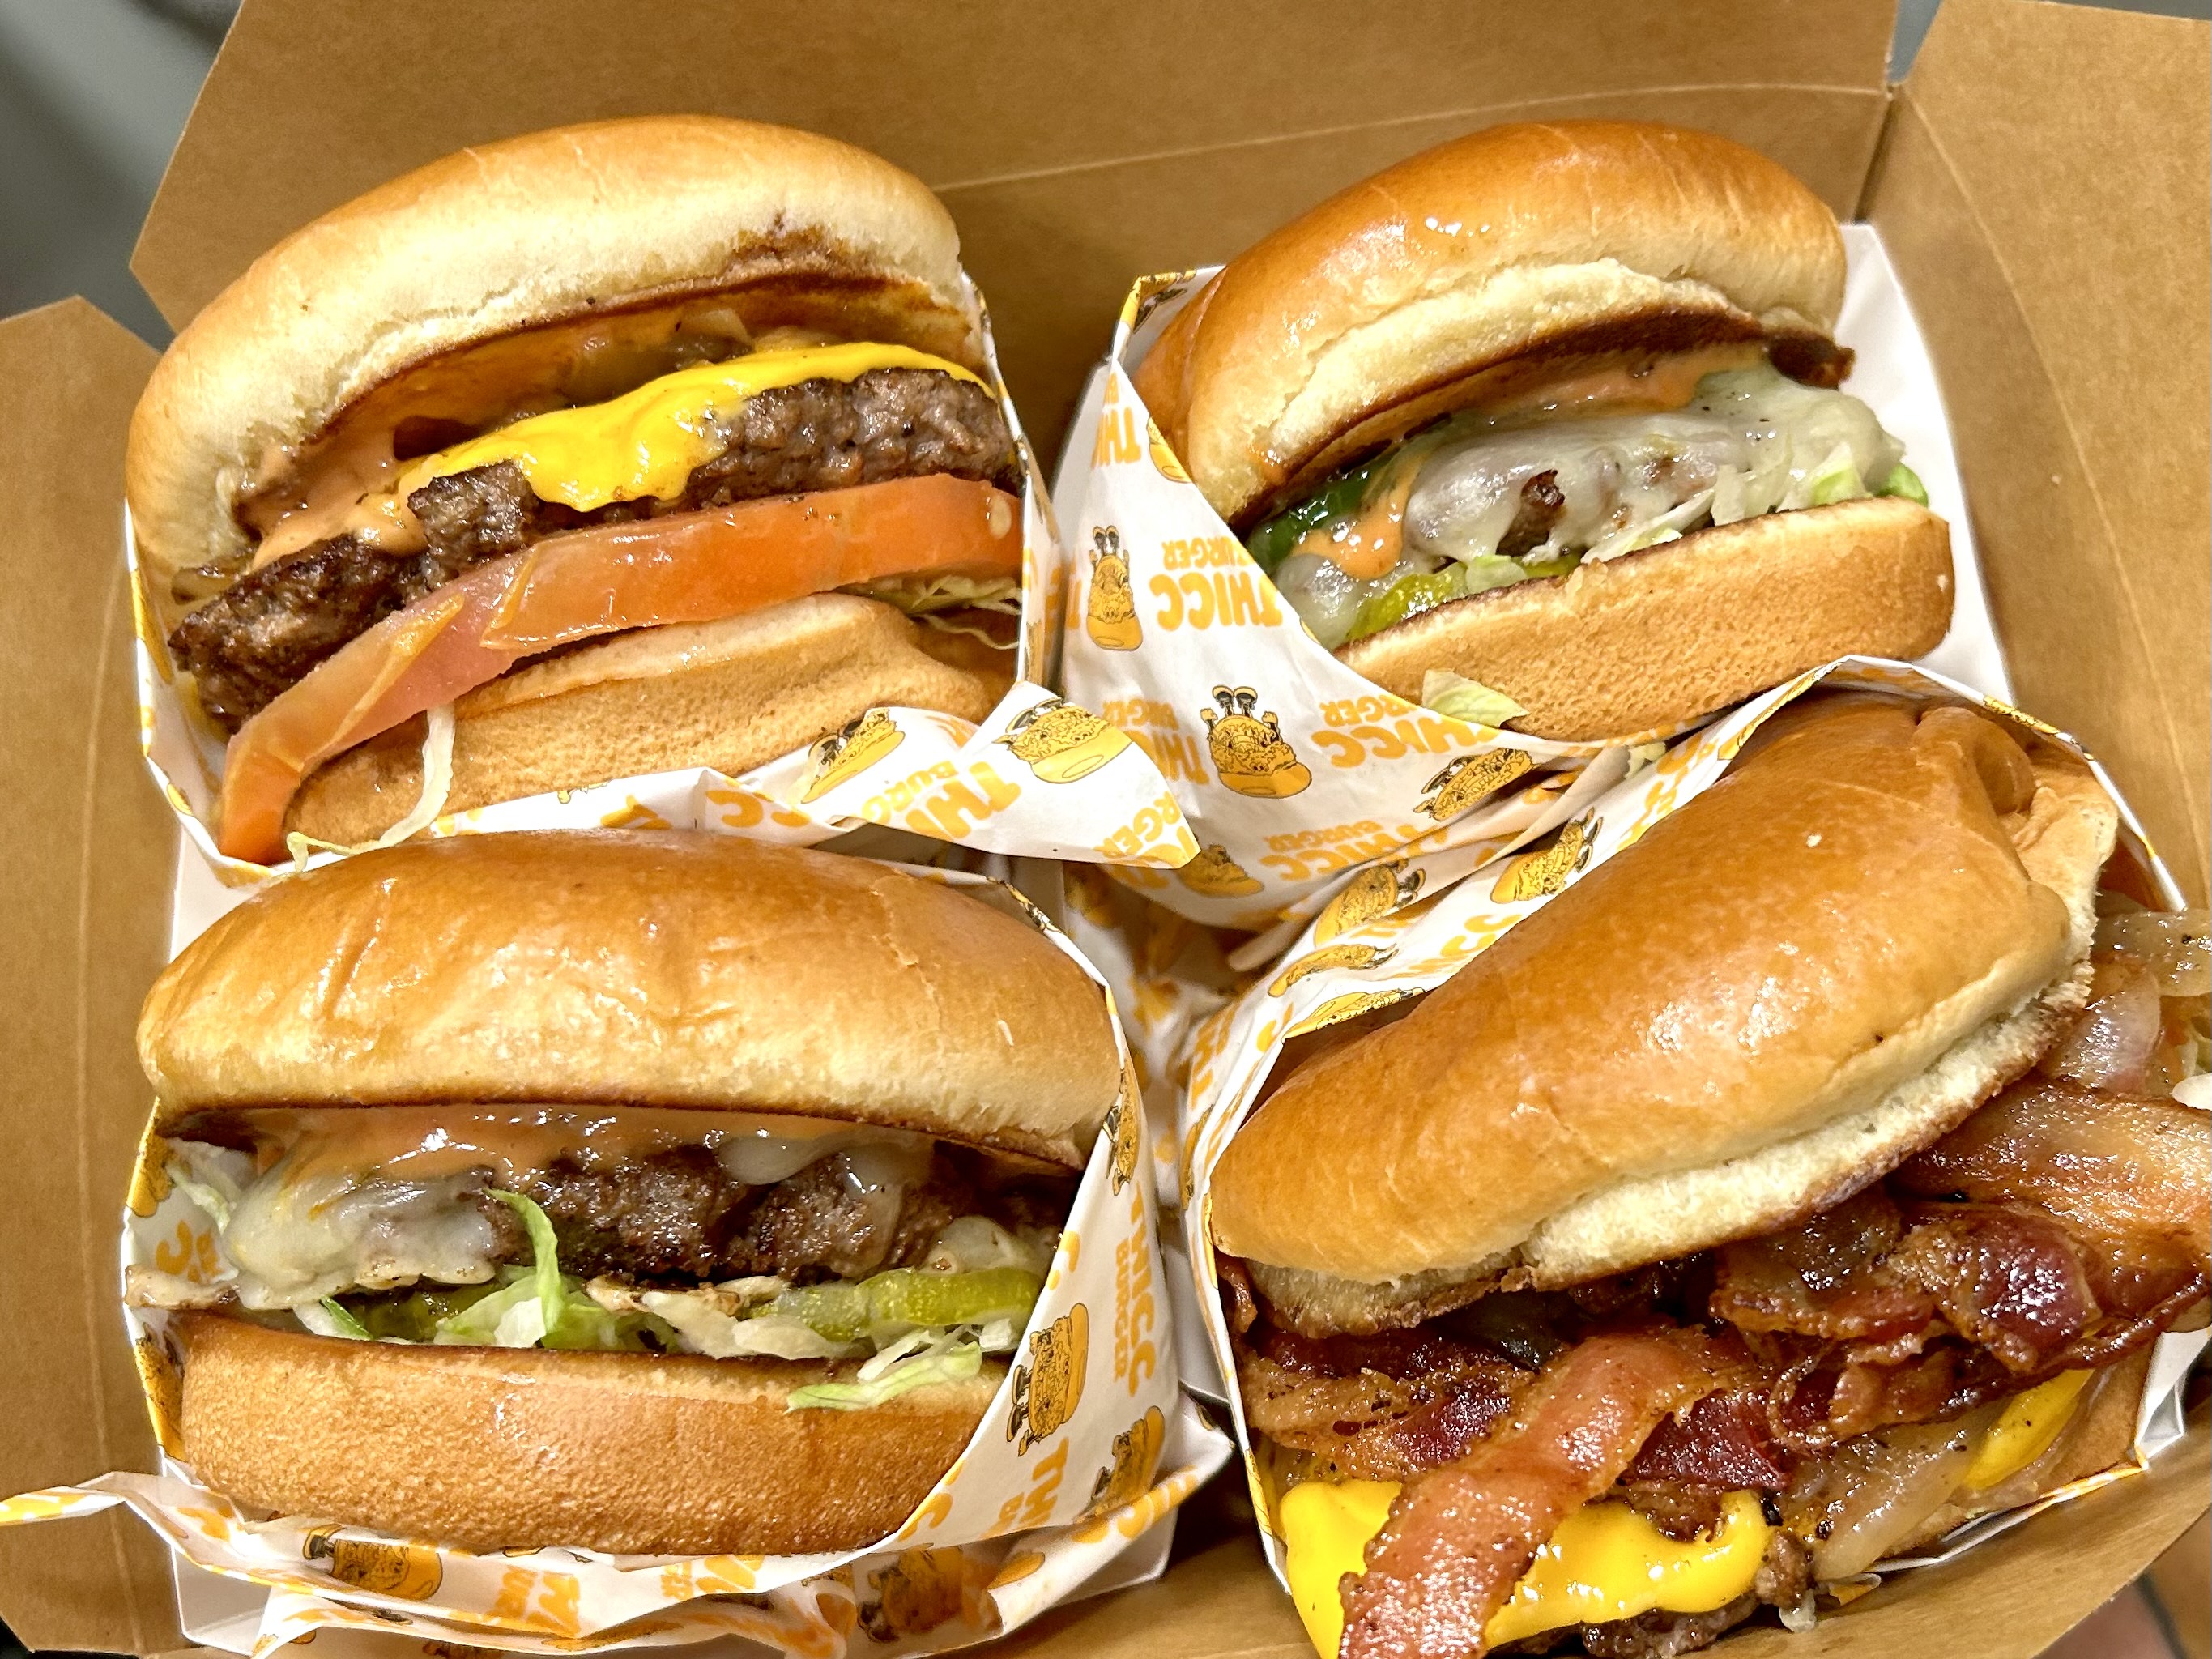 An overhead, slightly tilted shot of burgers wrapped in yellow and white paper at a new stand, with bacon and other toppings.